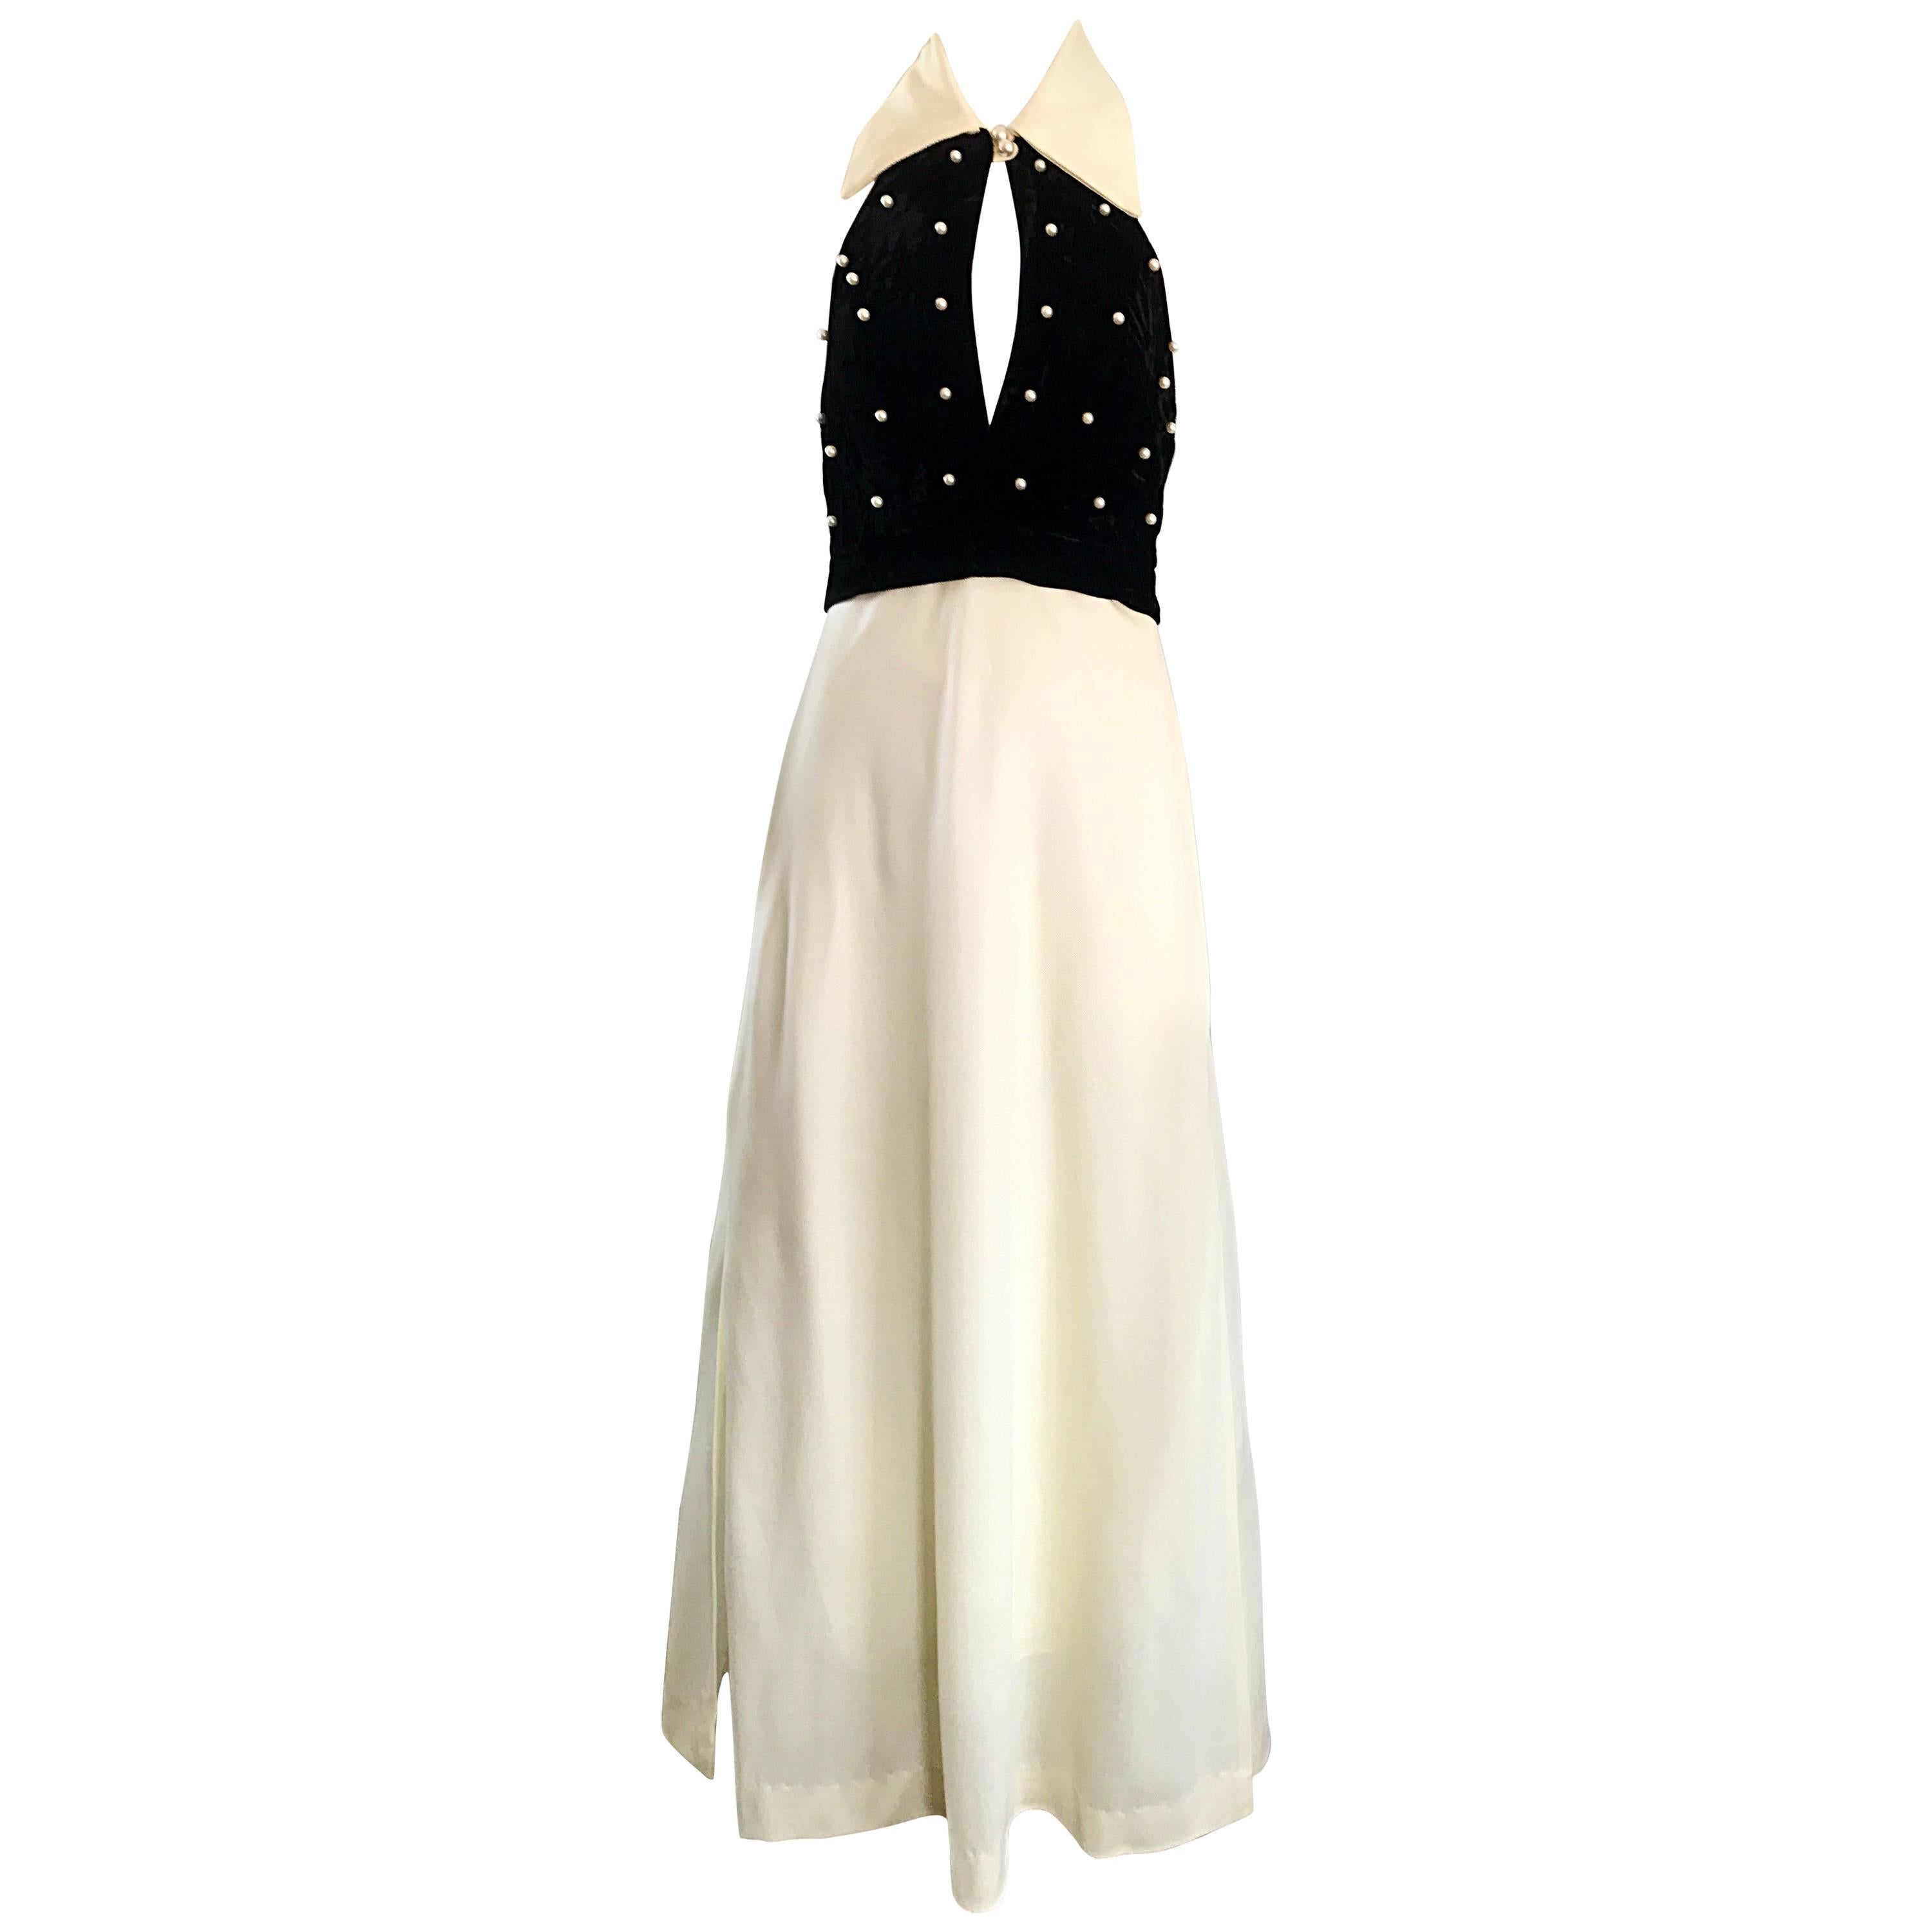 1970s Black and White Pearl Encrusted Peek-a-Boo Vintage 70s Maxi Dress 